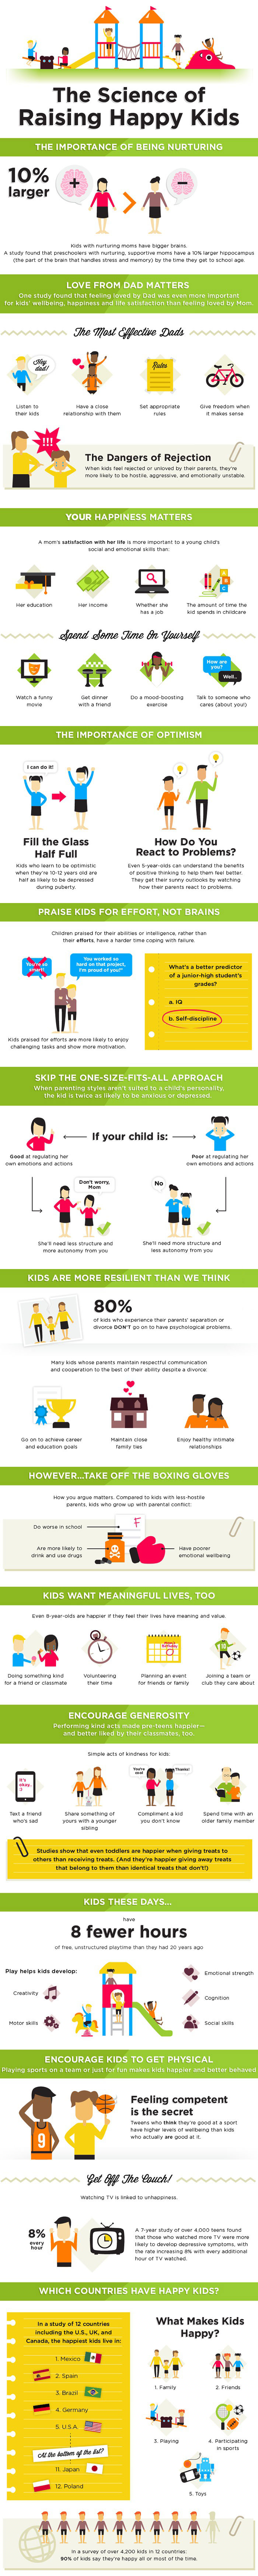 the science of raising happy kids, info graphic